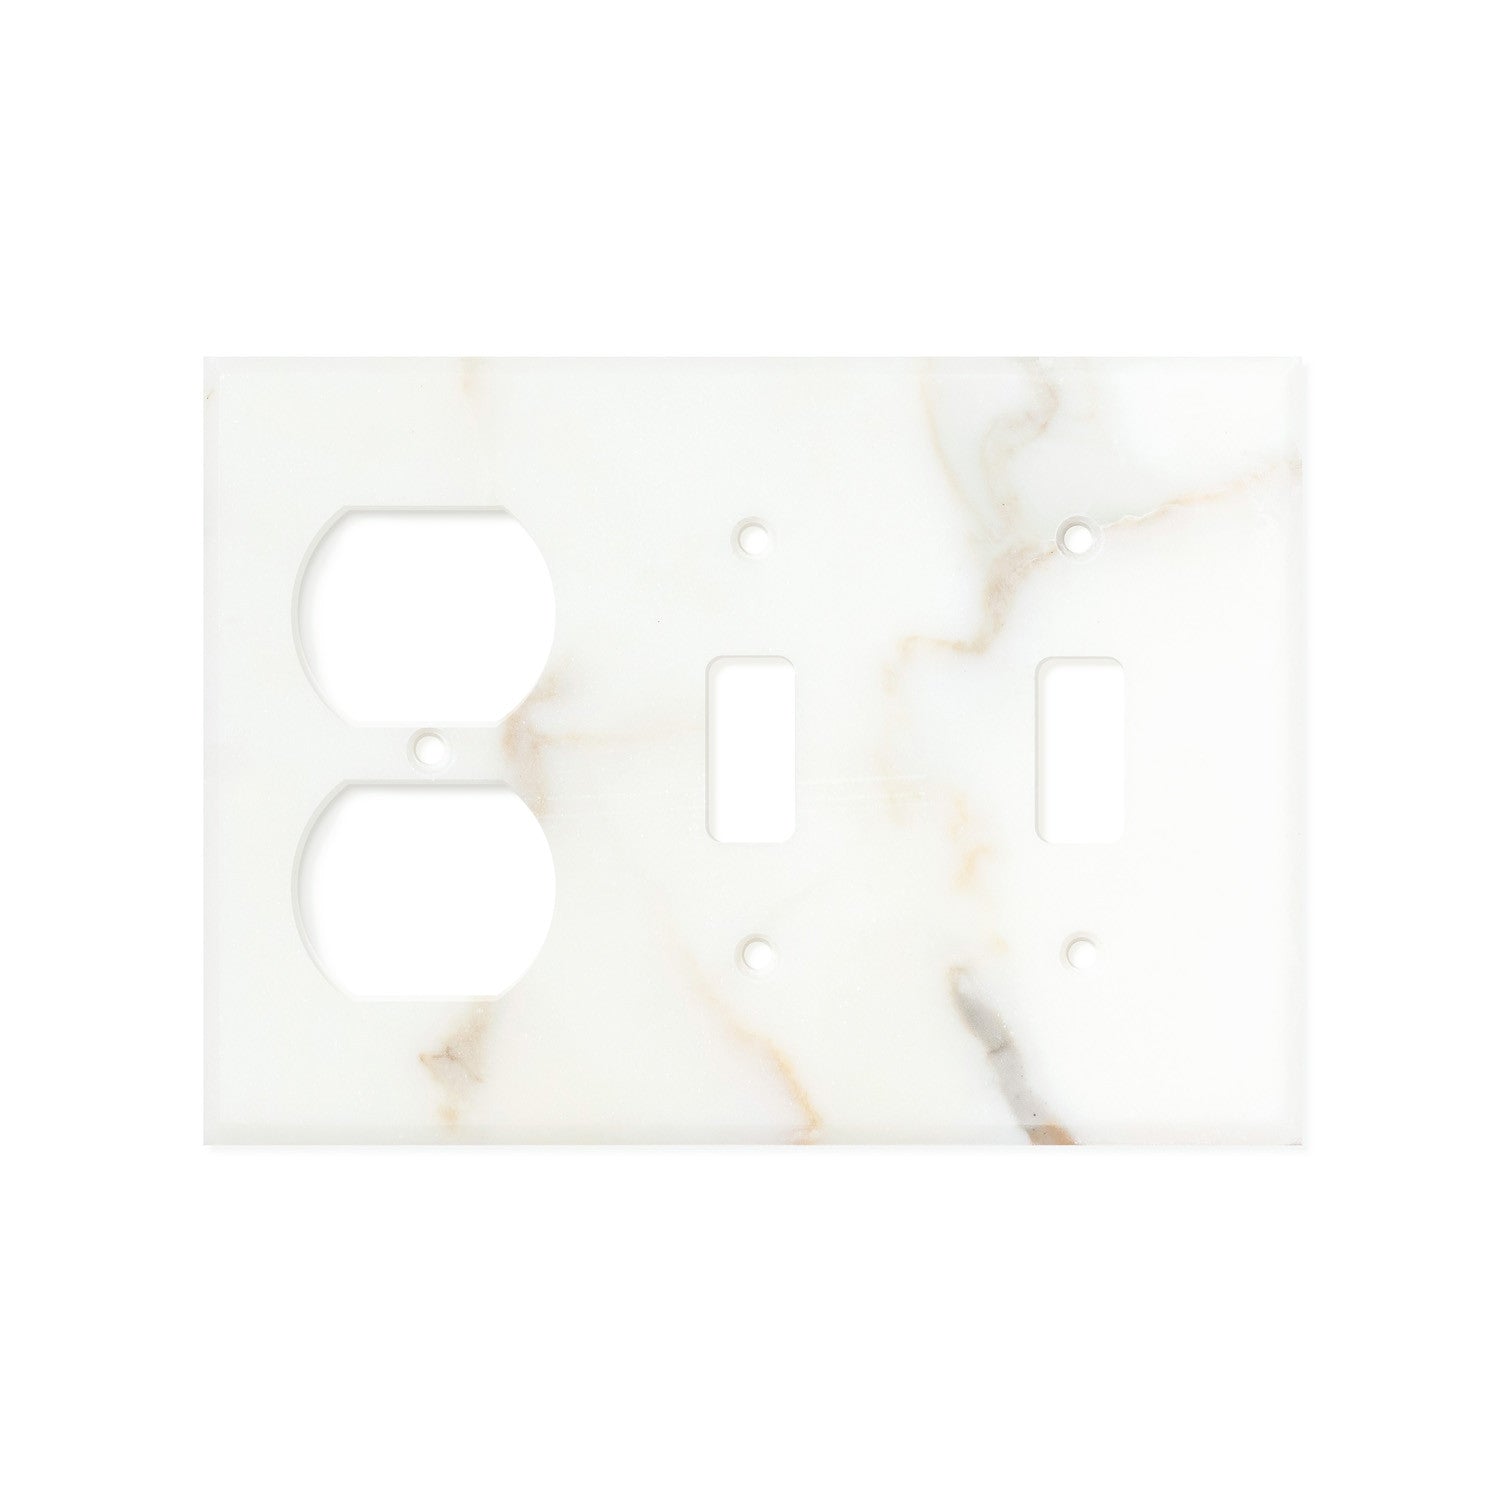 Calacatta Gold Marble Switch Plate Cover, Polished (DOUBLE TOGGLE DUPLEX) - Tilephile